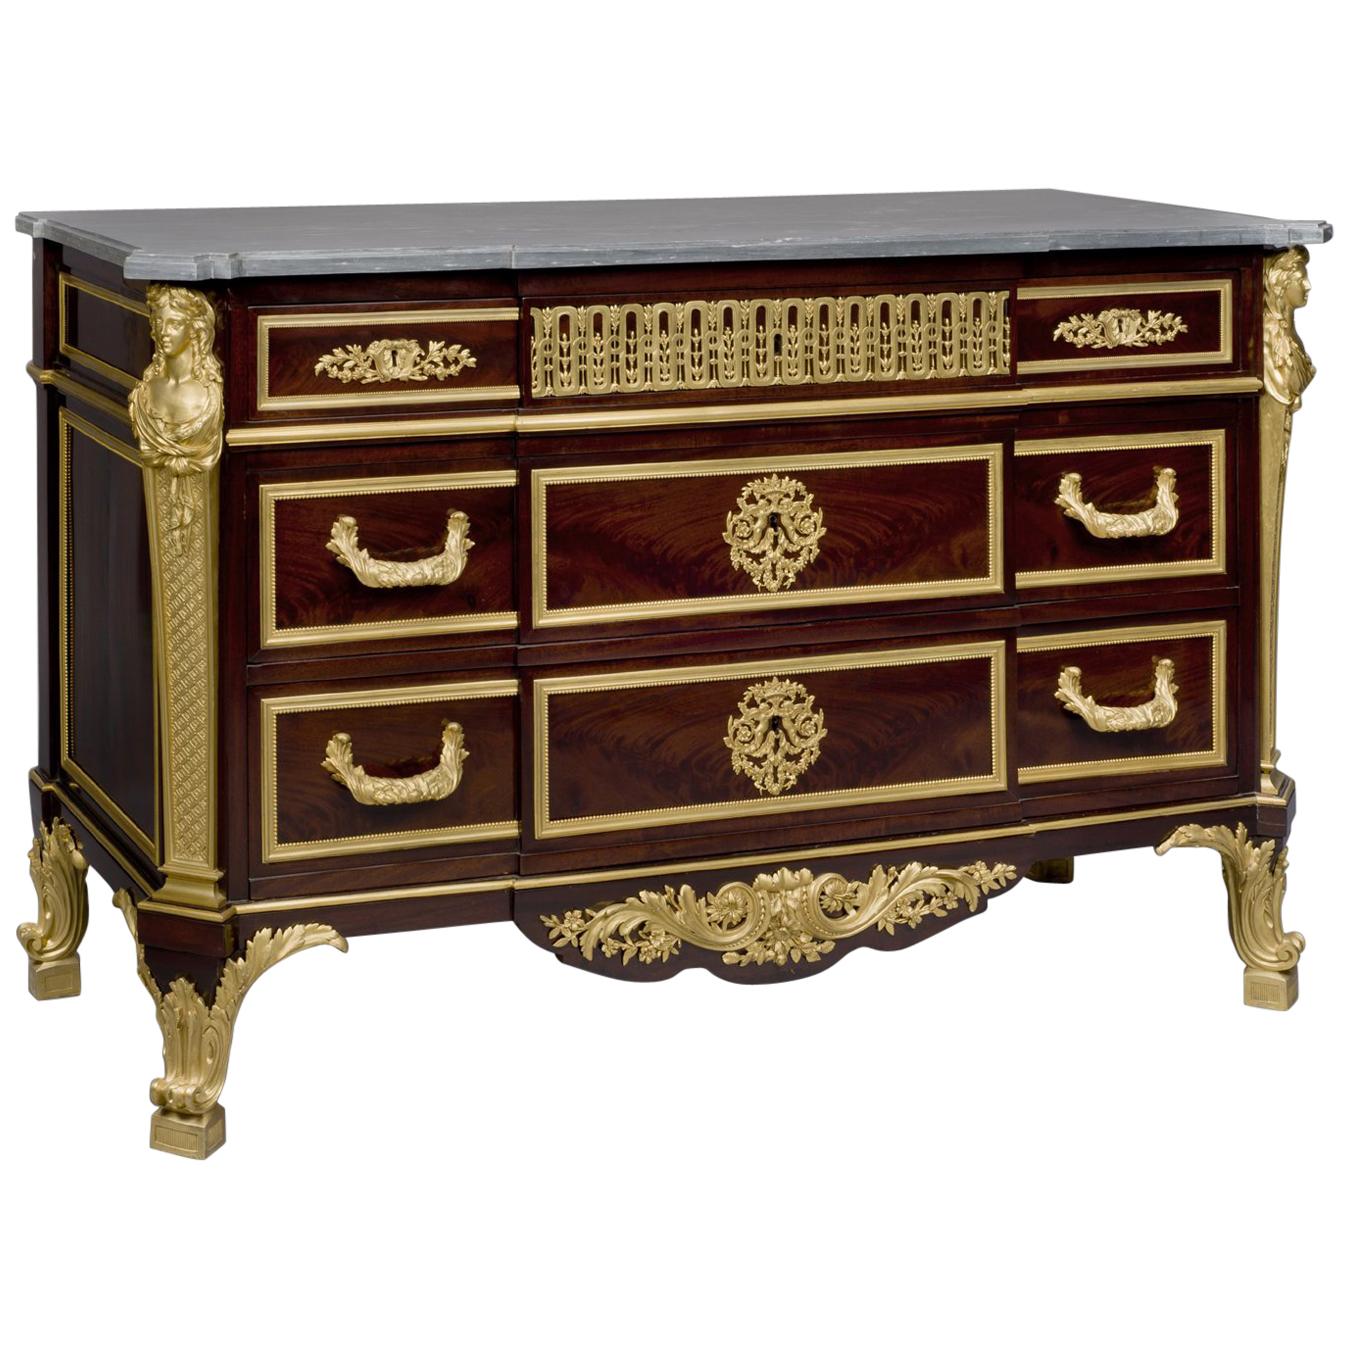 Louis XVI Style Commode after the Model by Jean-Henri Riesener, circa 1880